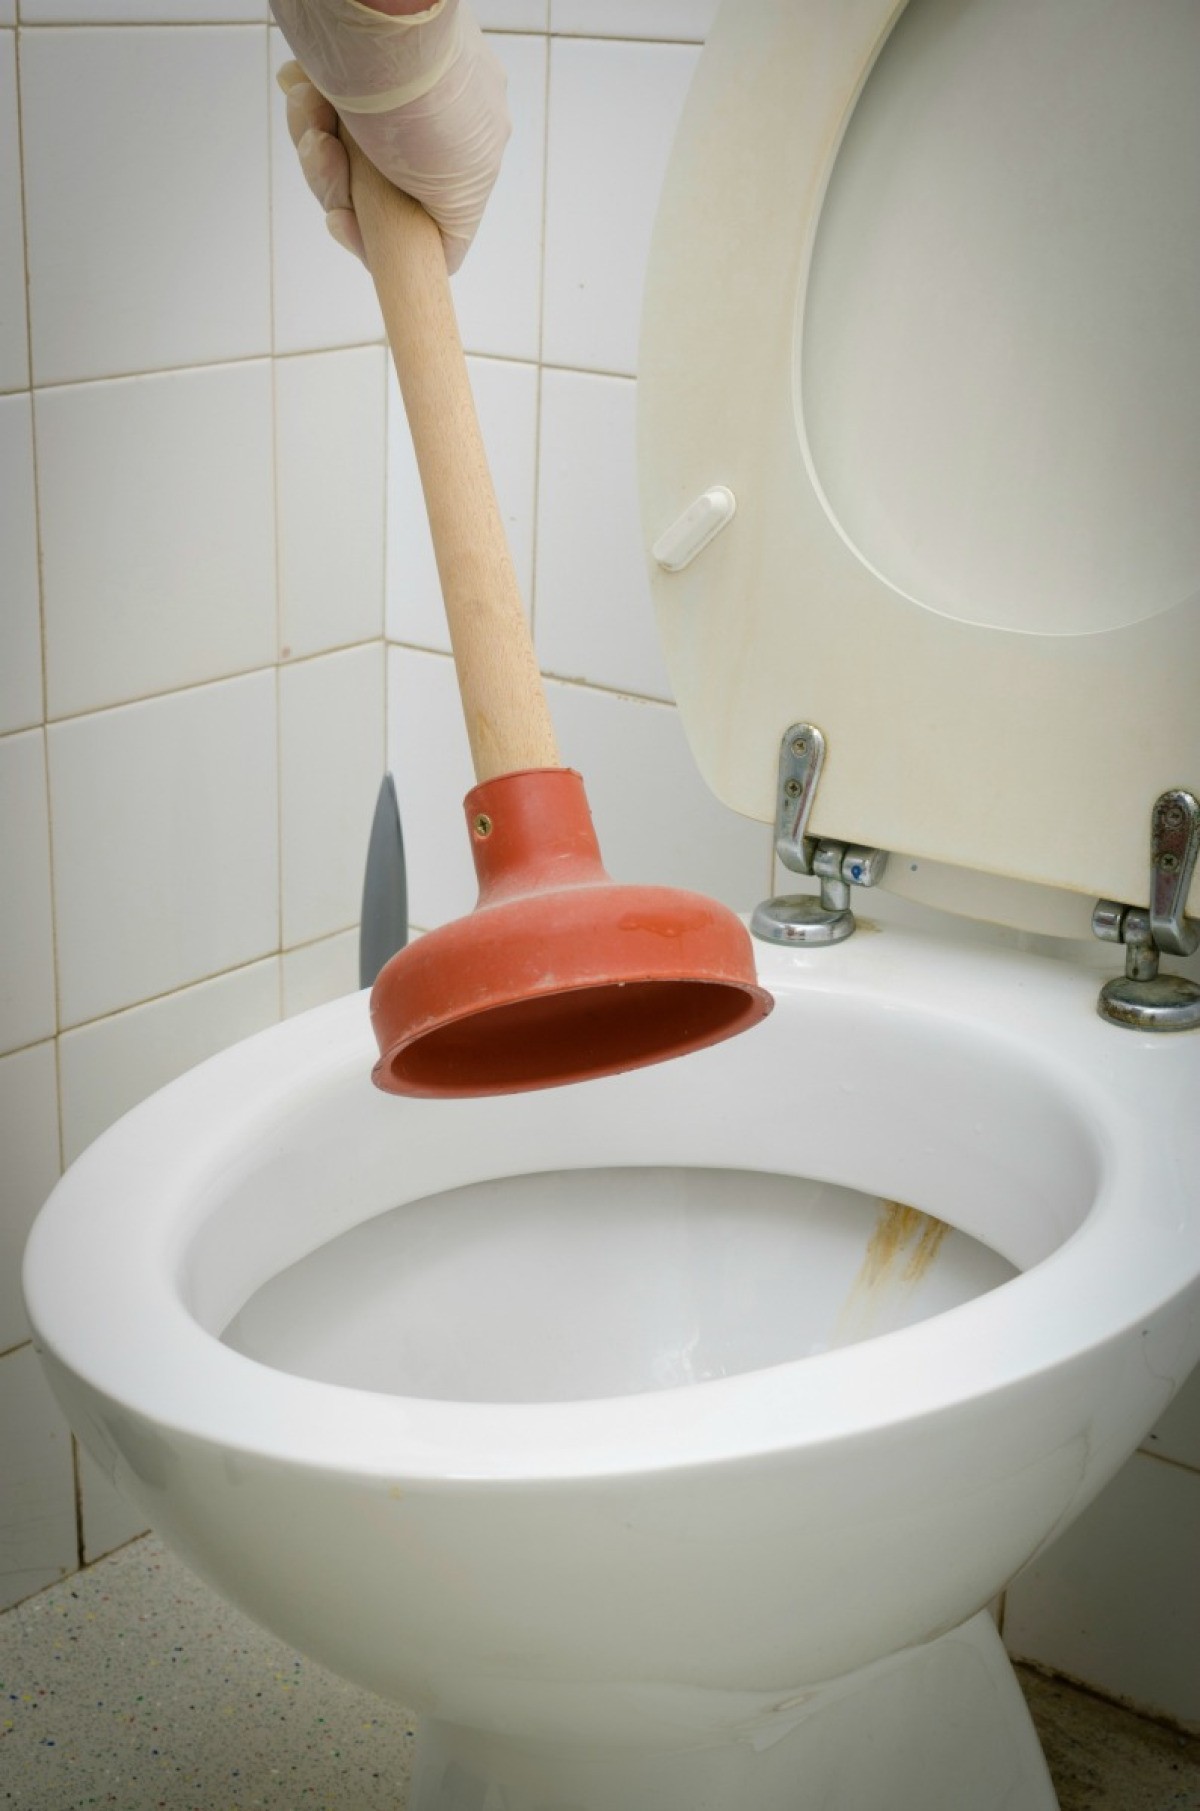 Plunging Clogged Toilet Backs Up Into Sink? ThriftyFun